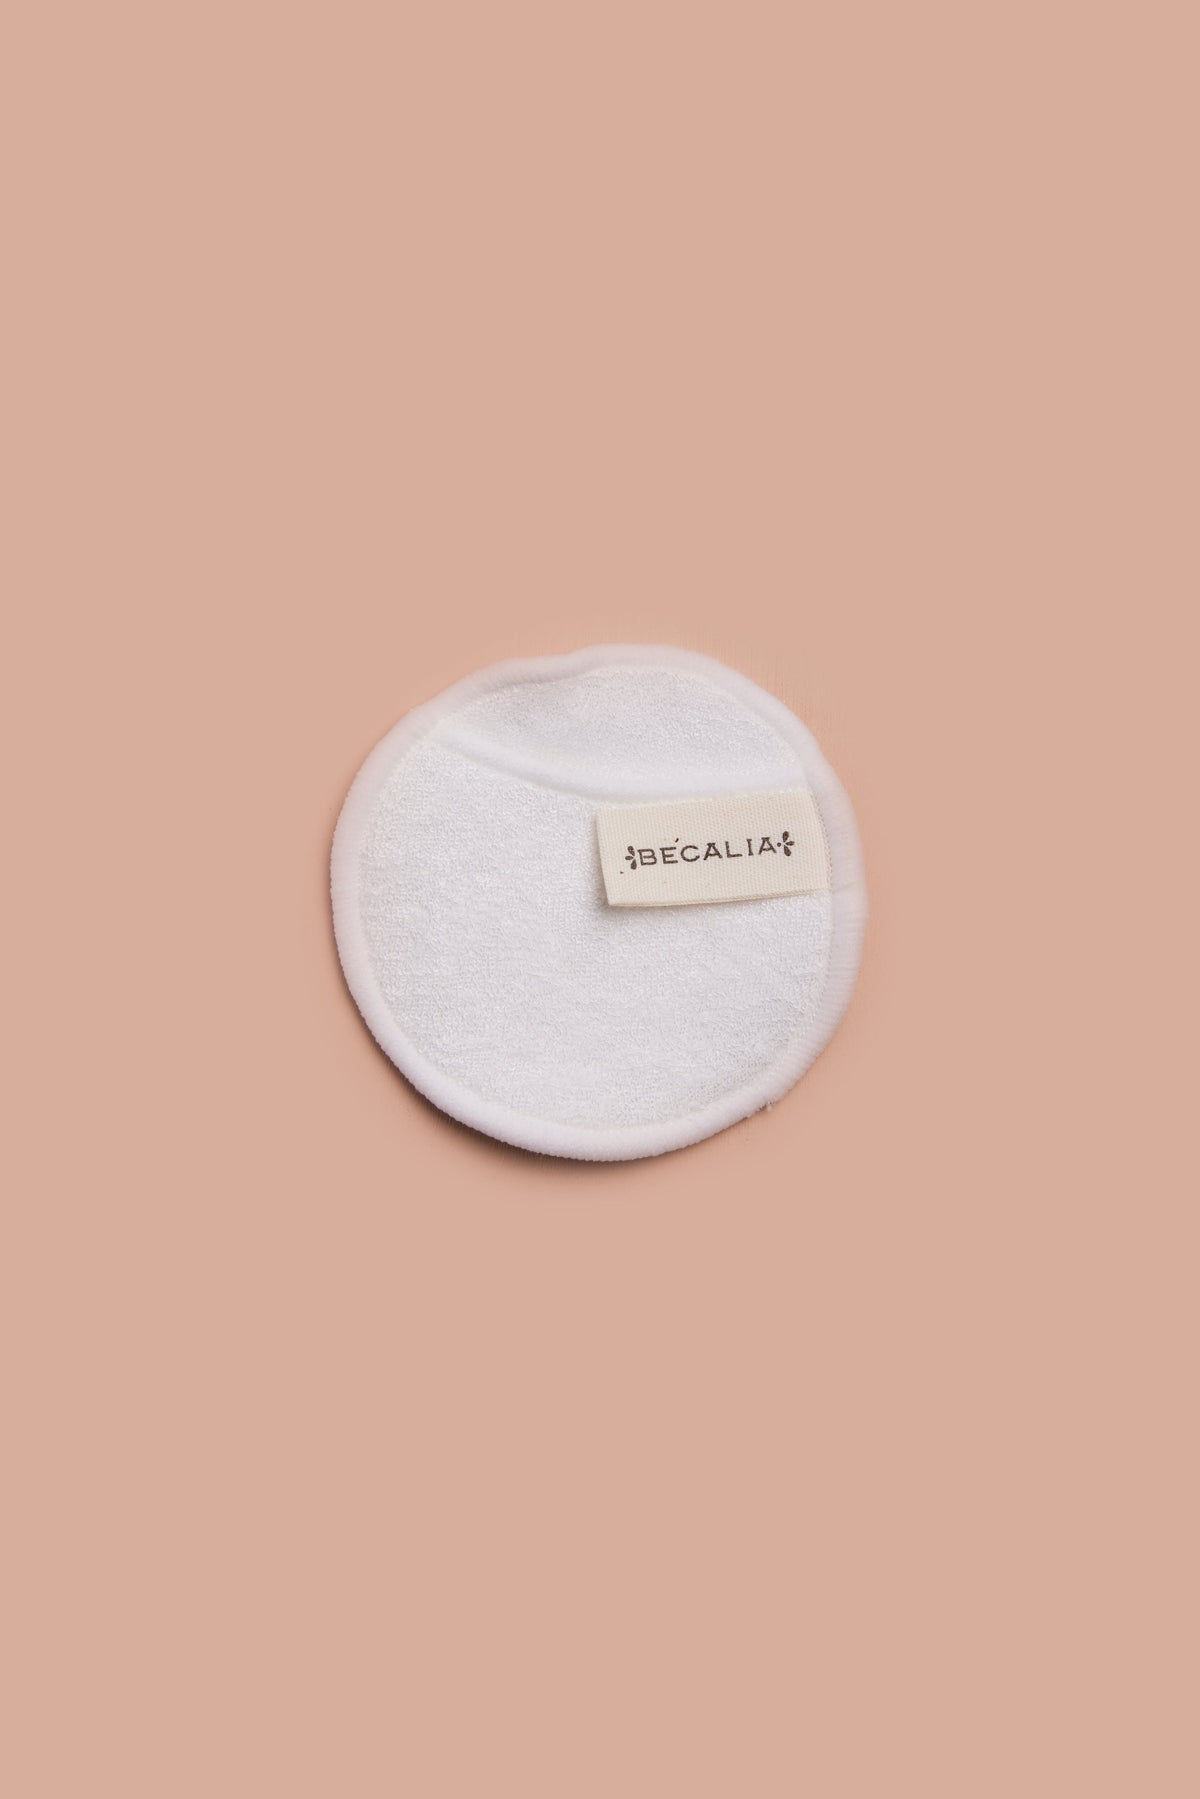 Cleansing Facial Rounds by Becalia Botanicals